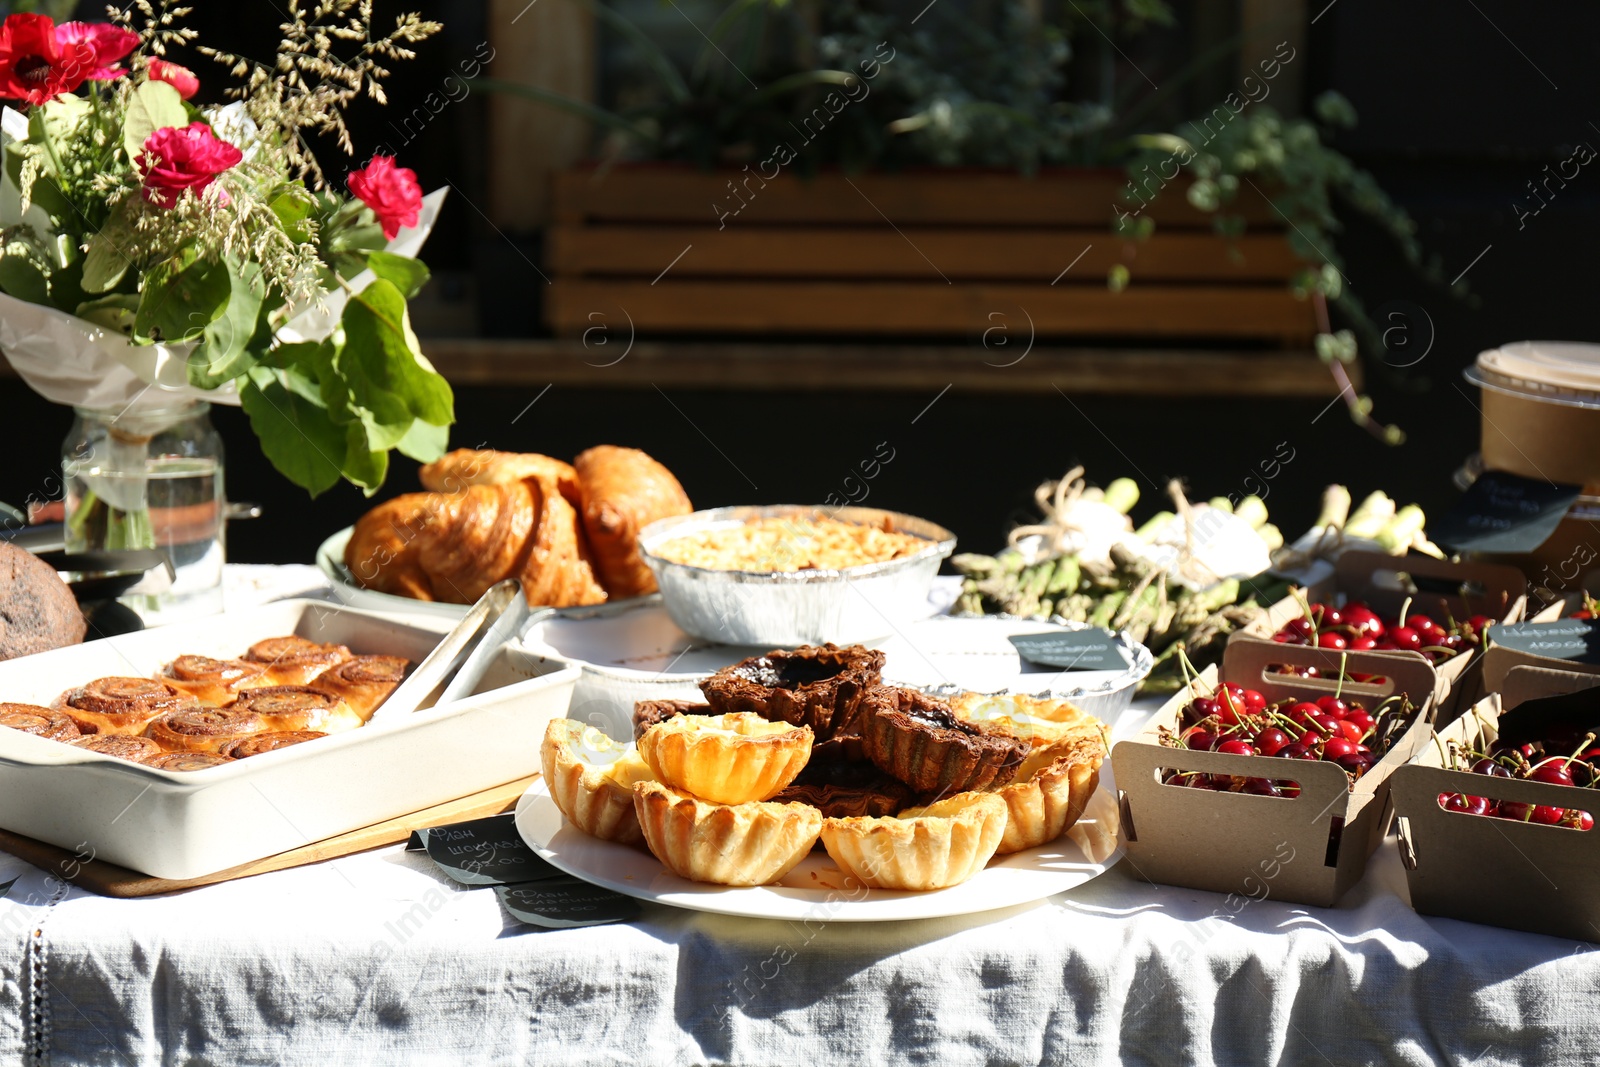 Photo of Tasty fresh pastries, red ripe cherries and other products on table outdoors